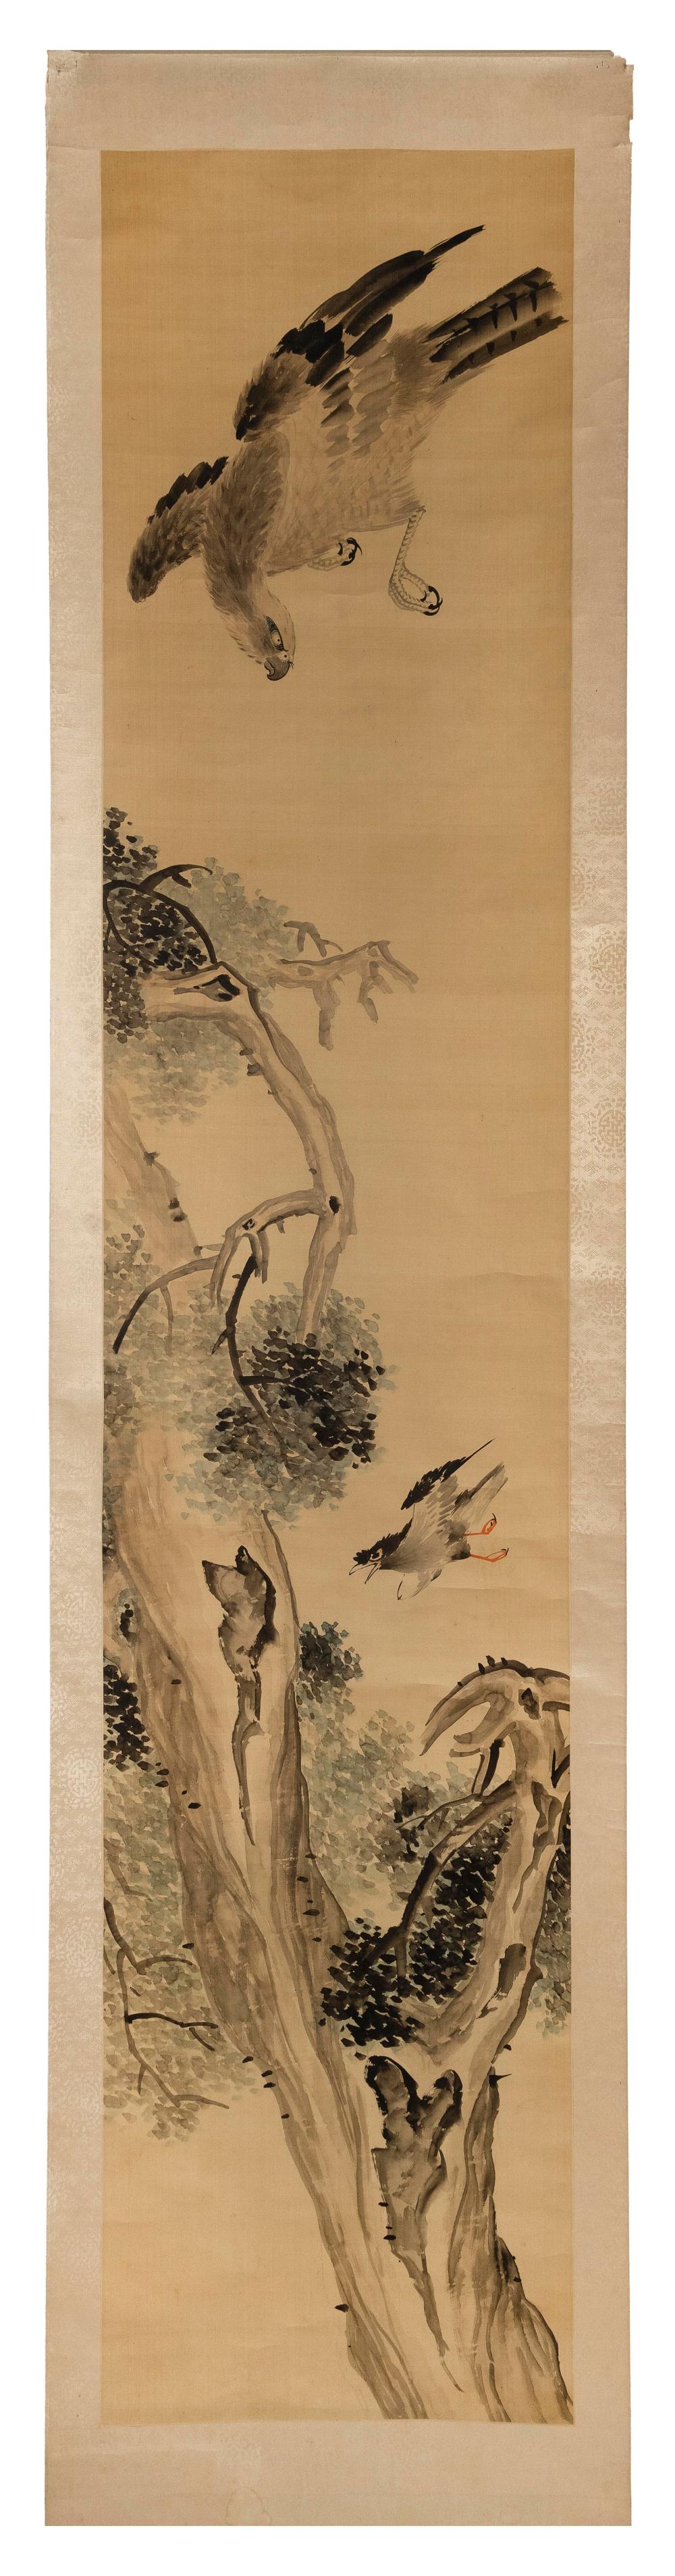 JAPANESE SCROLL PAINTING OF BIRDS 3c7d42